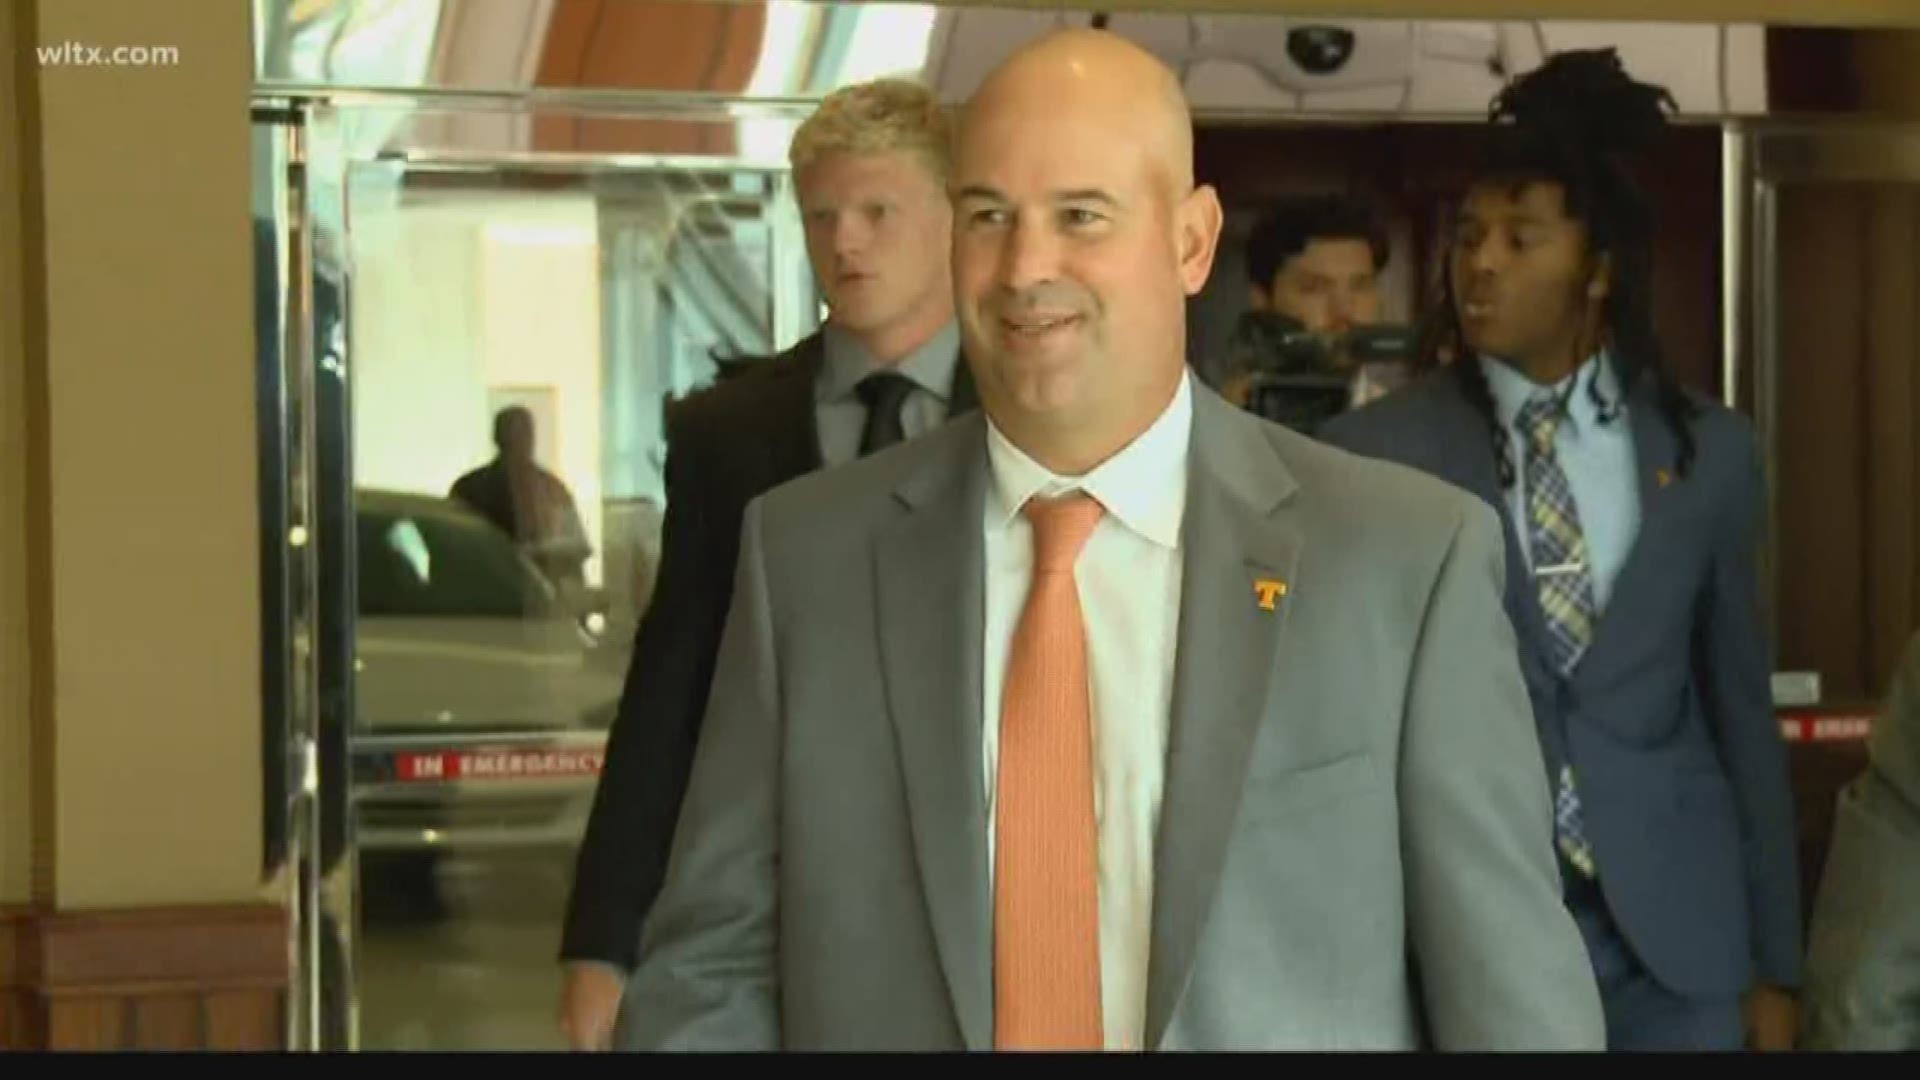 New Tennessee head coach Jeremy Pruitt cites his own background of working with kids as proof that Murray's criticism is off-base. Nick Saban Weighs In Too.